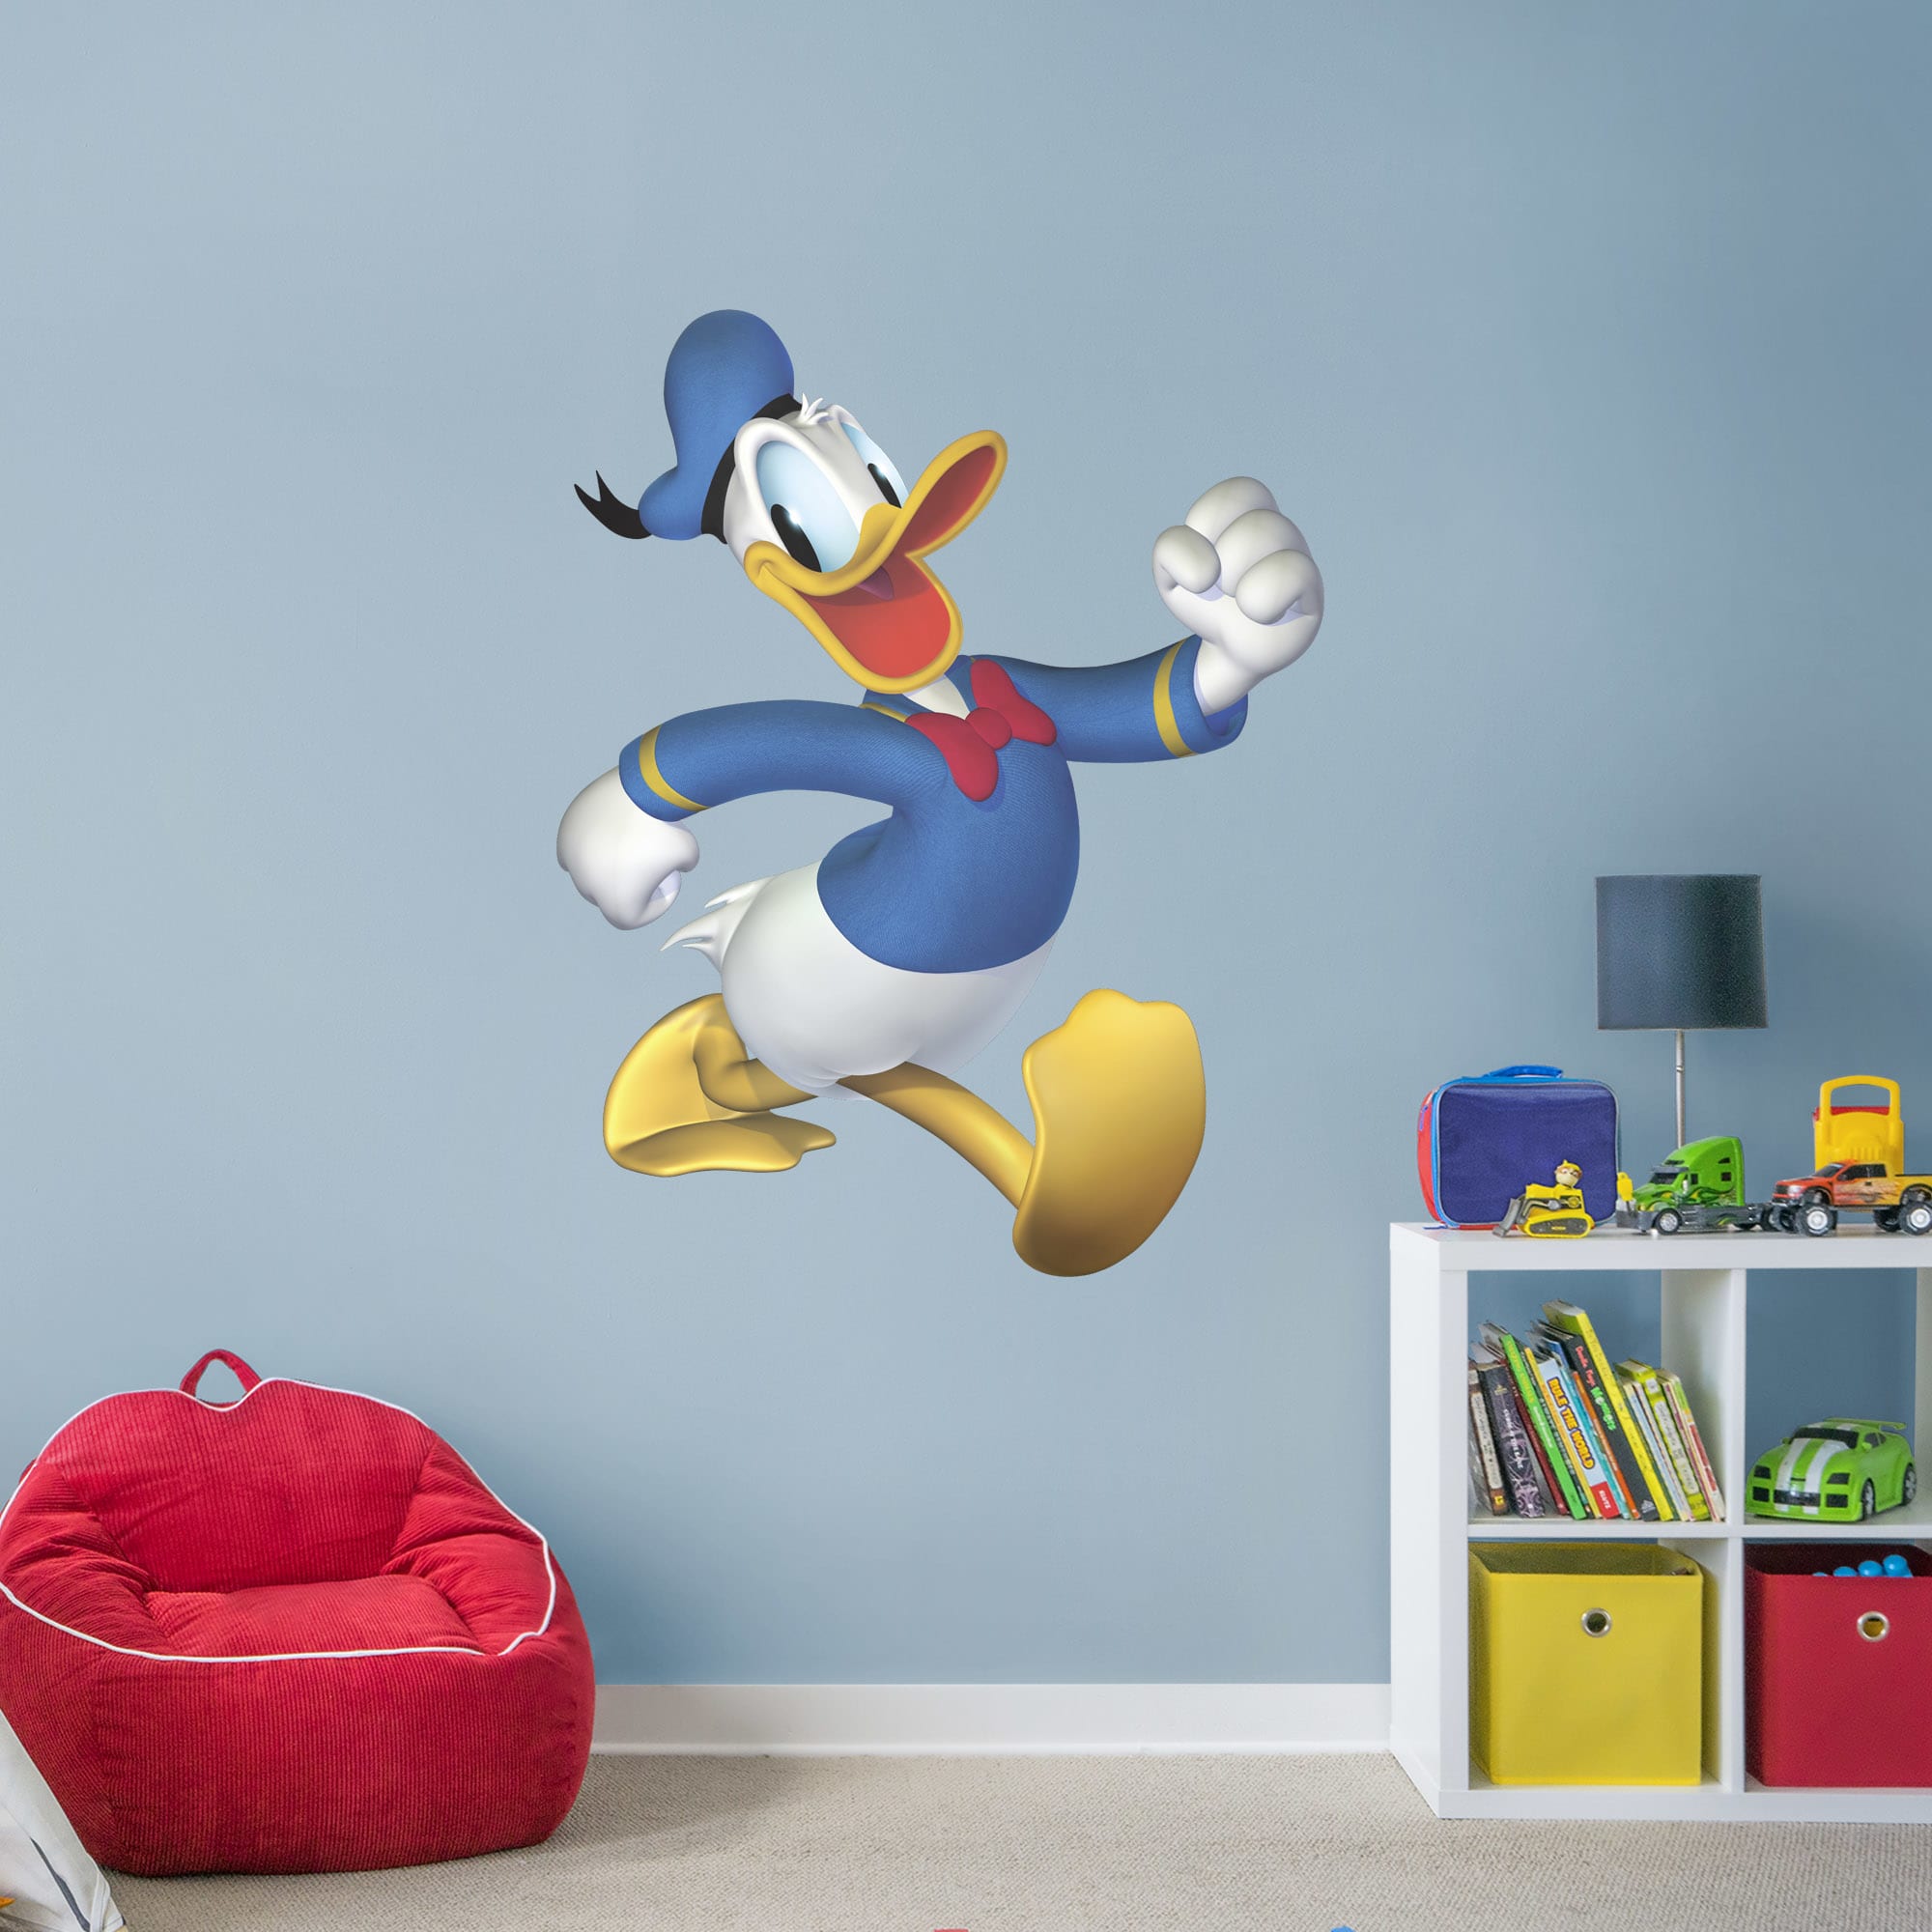 Donald Duck - Officially Licensed Disney Removable Wall Decal Giant Character + 2 Decals (38.5"W x 48.5"H) by Fathead | Vinyl